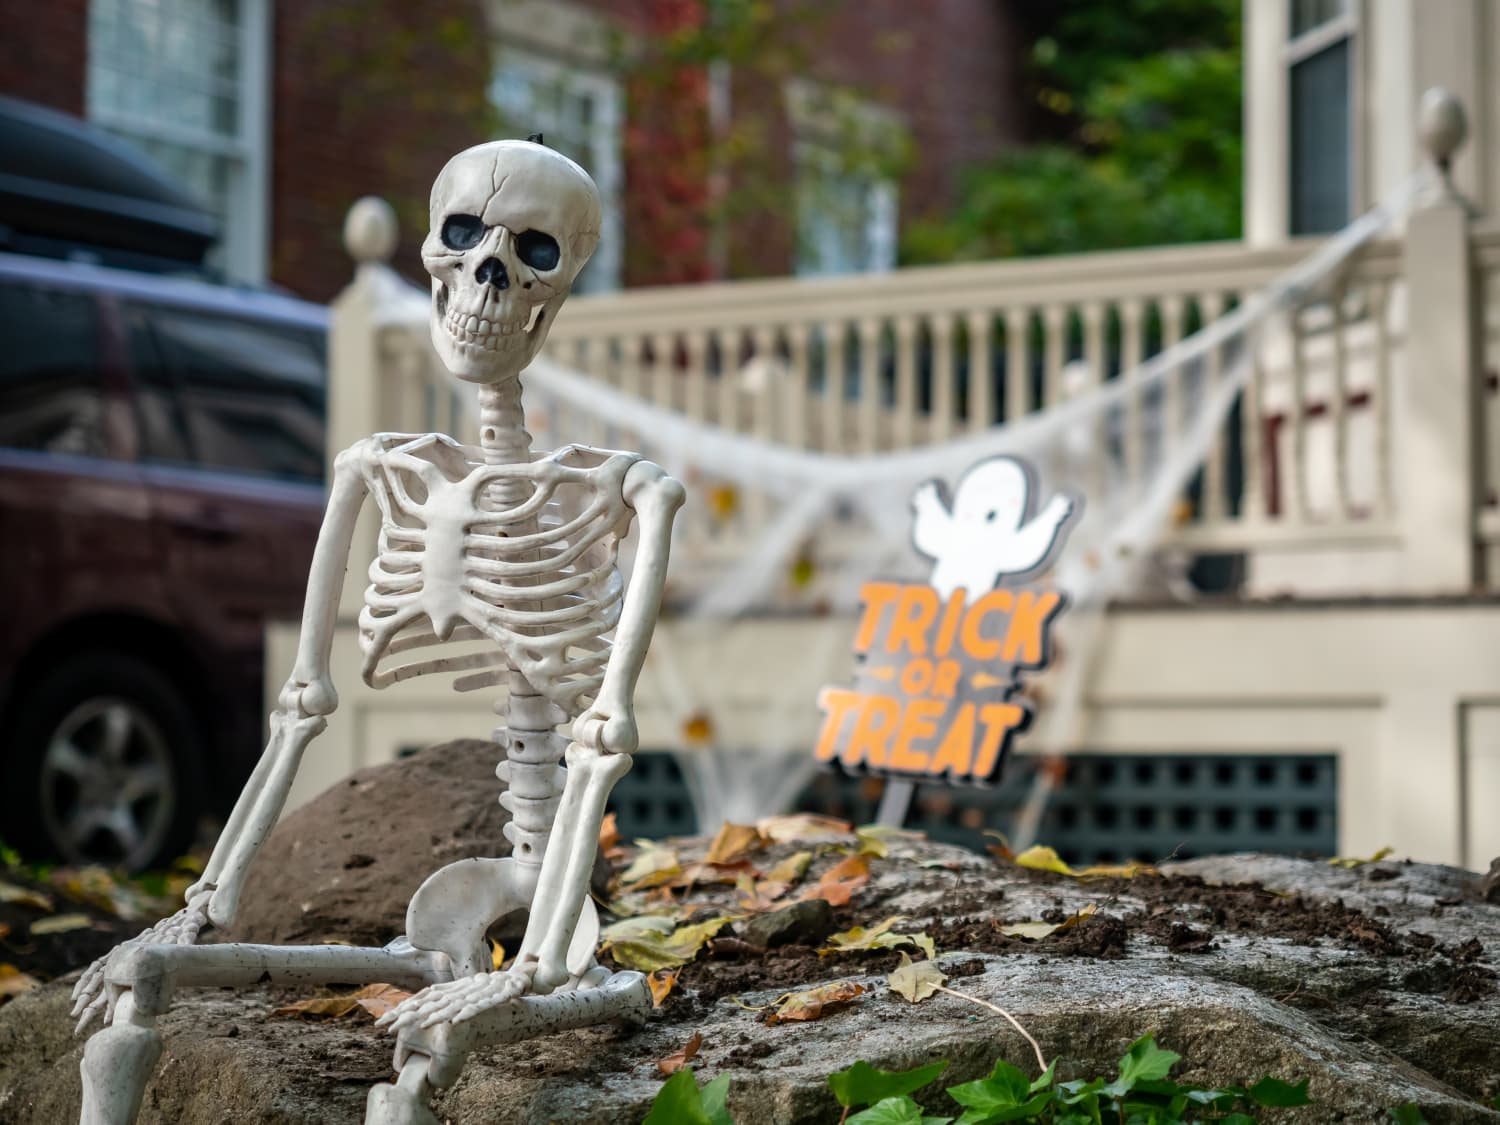 These Halloween Decorations on Twitter Perfectly Sum Up 2020